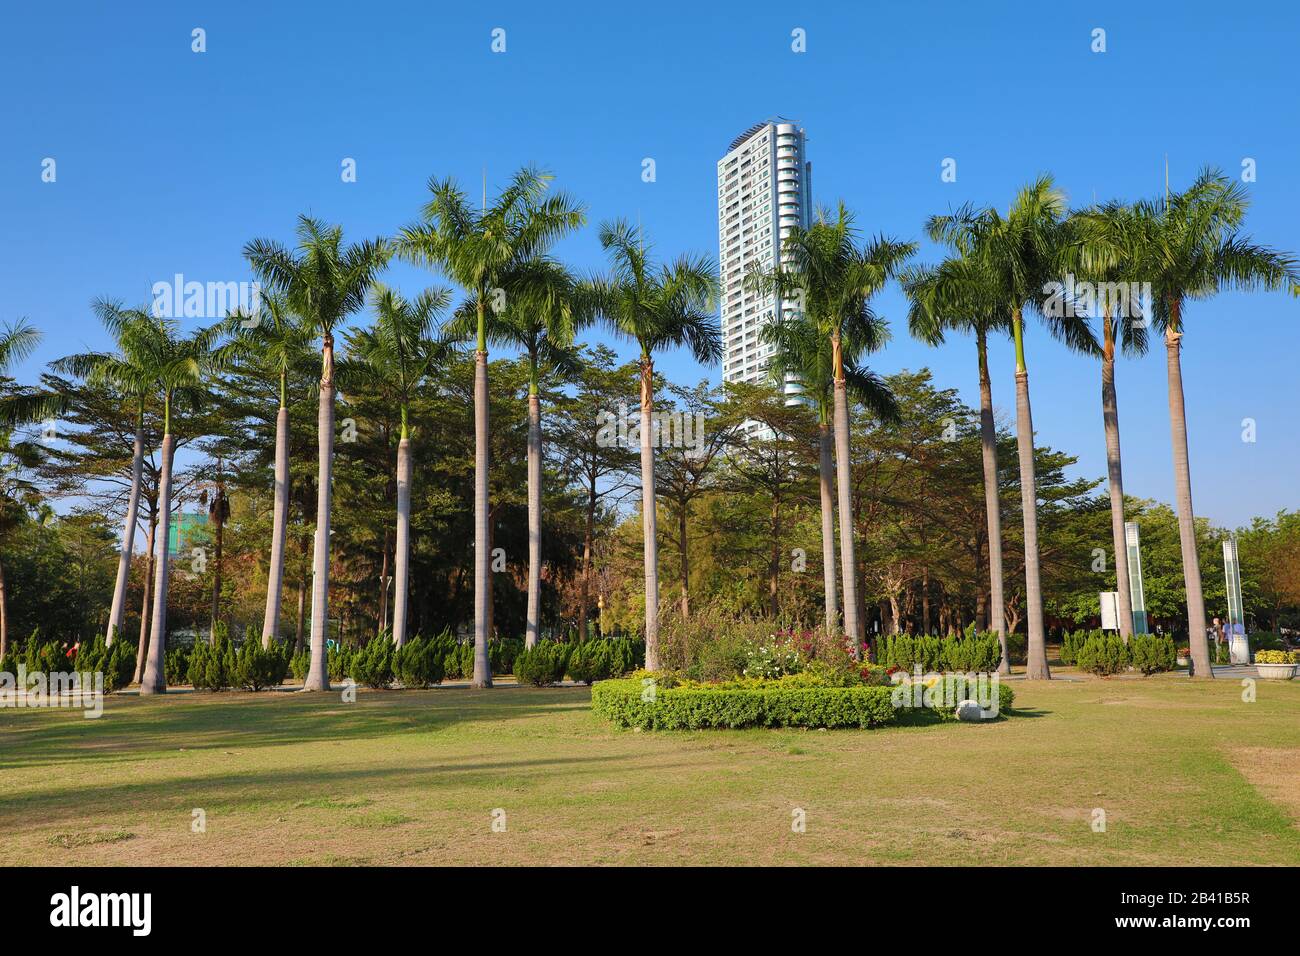 Palm trees in Central Park, Kaohsiung City, Taiwan Stock Photo